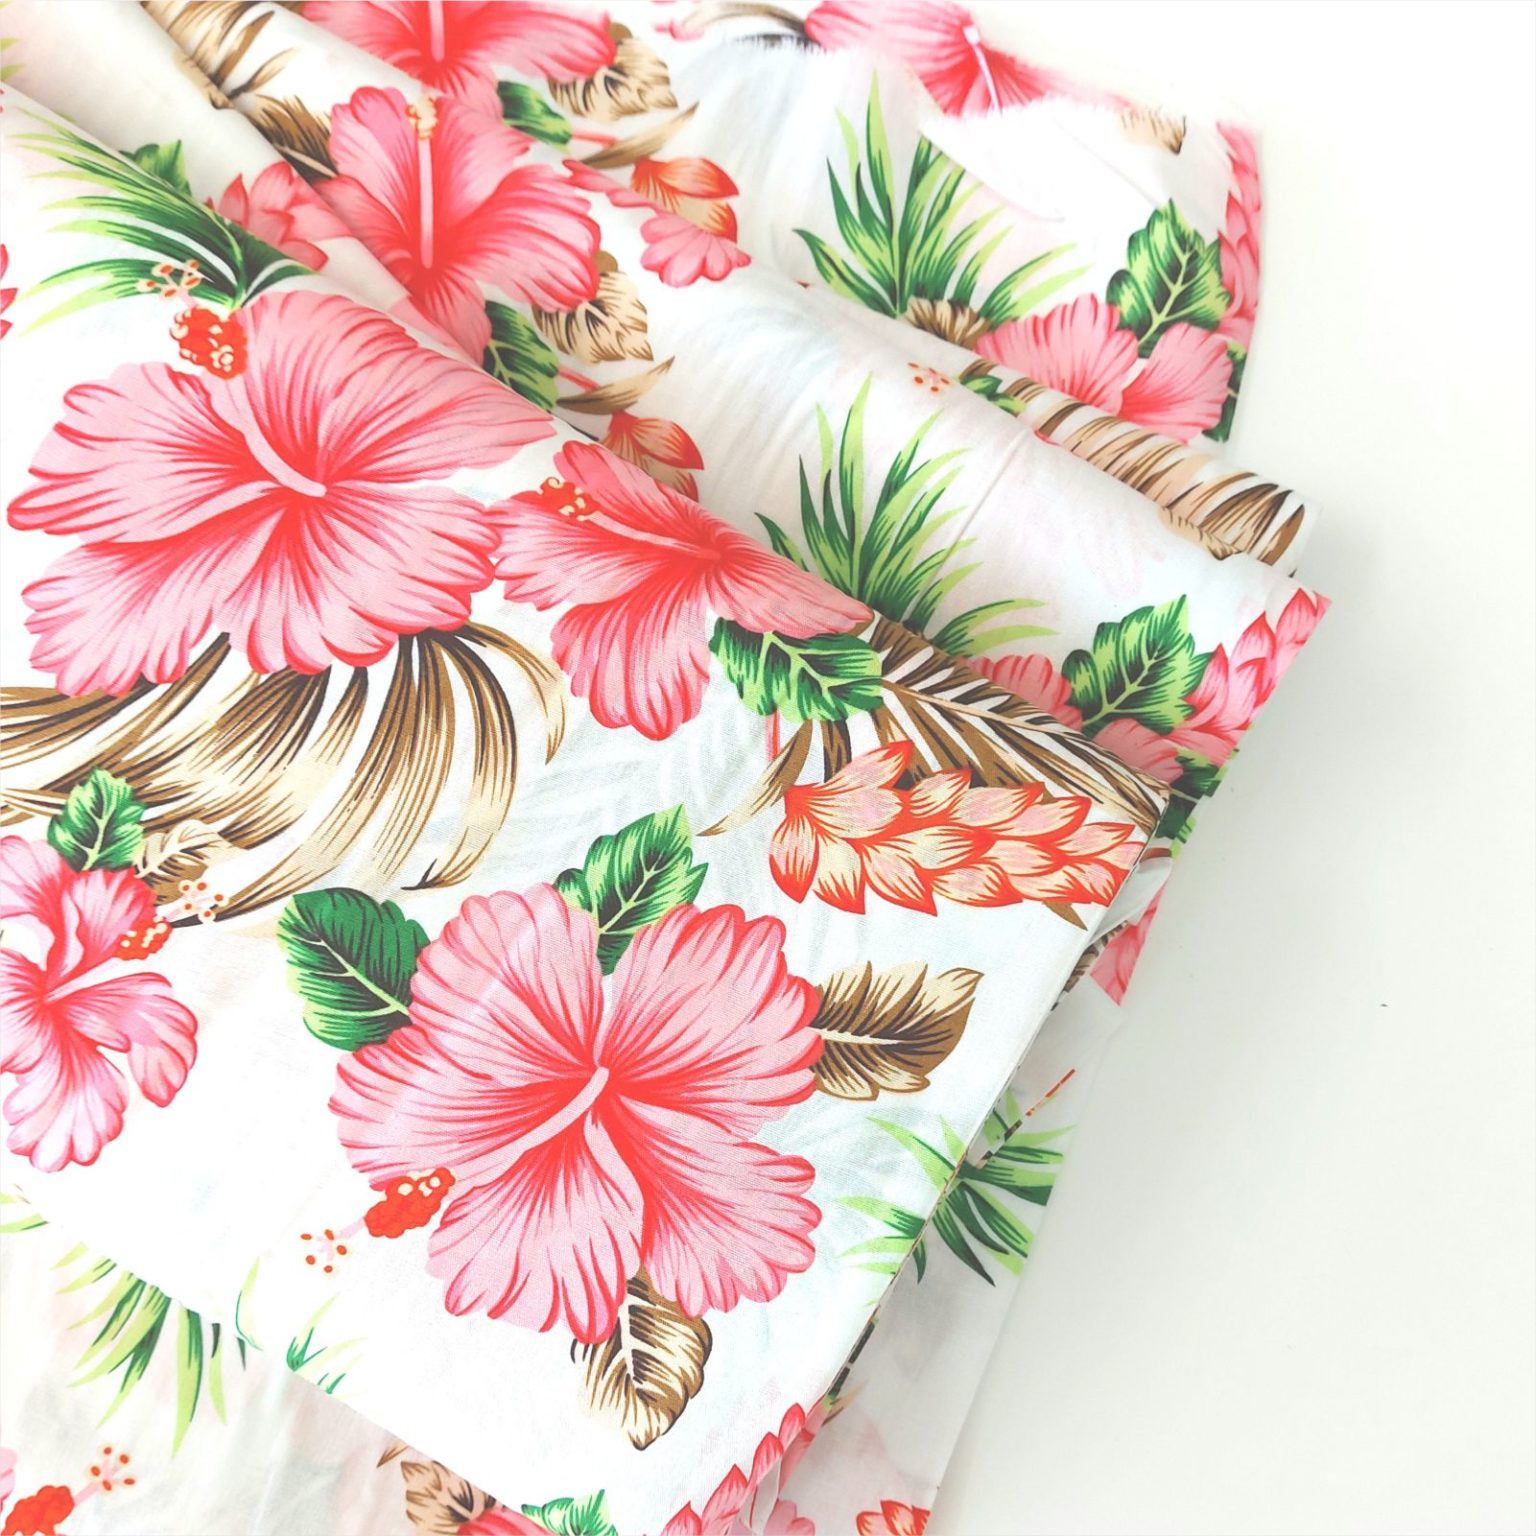 Hibiscus on white cotton fabric | More Sewing